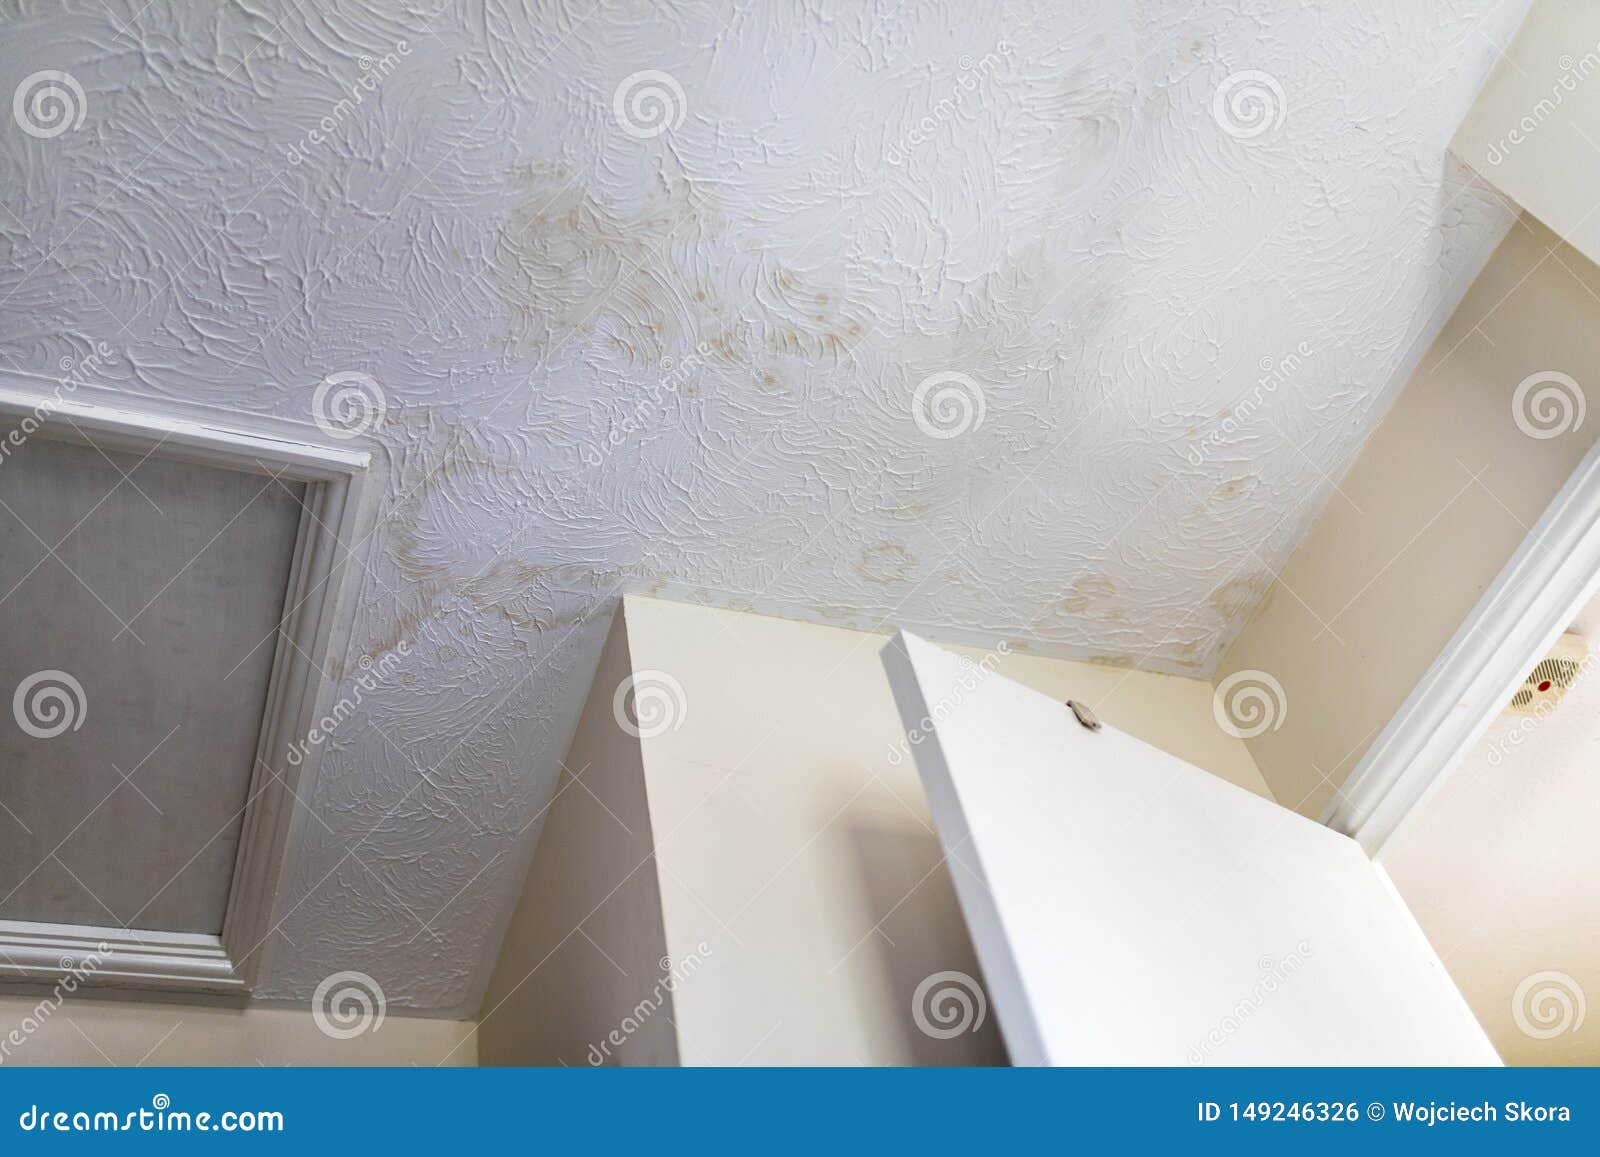 Stains On The Ceiling After Water Leakage Humidity On Wall